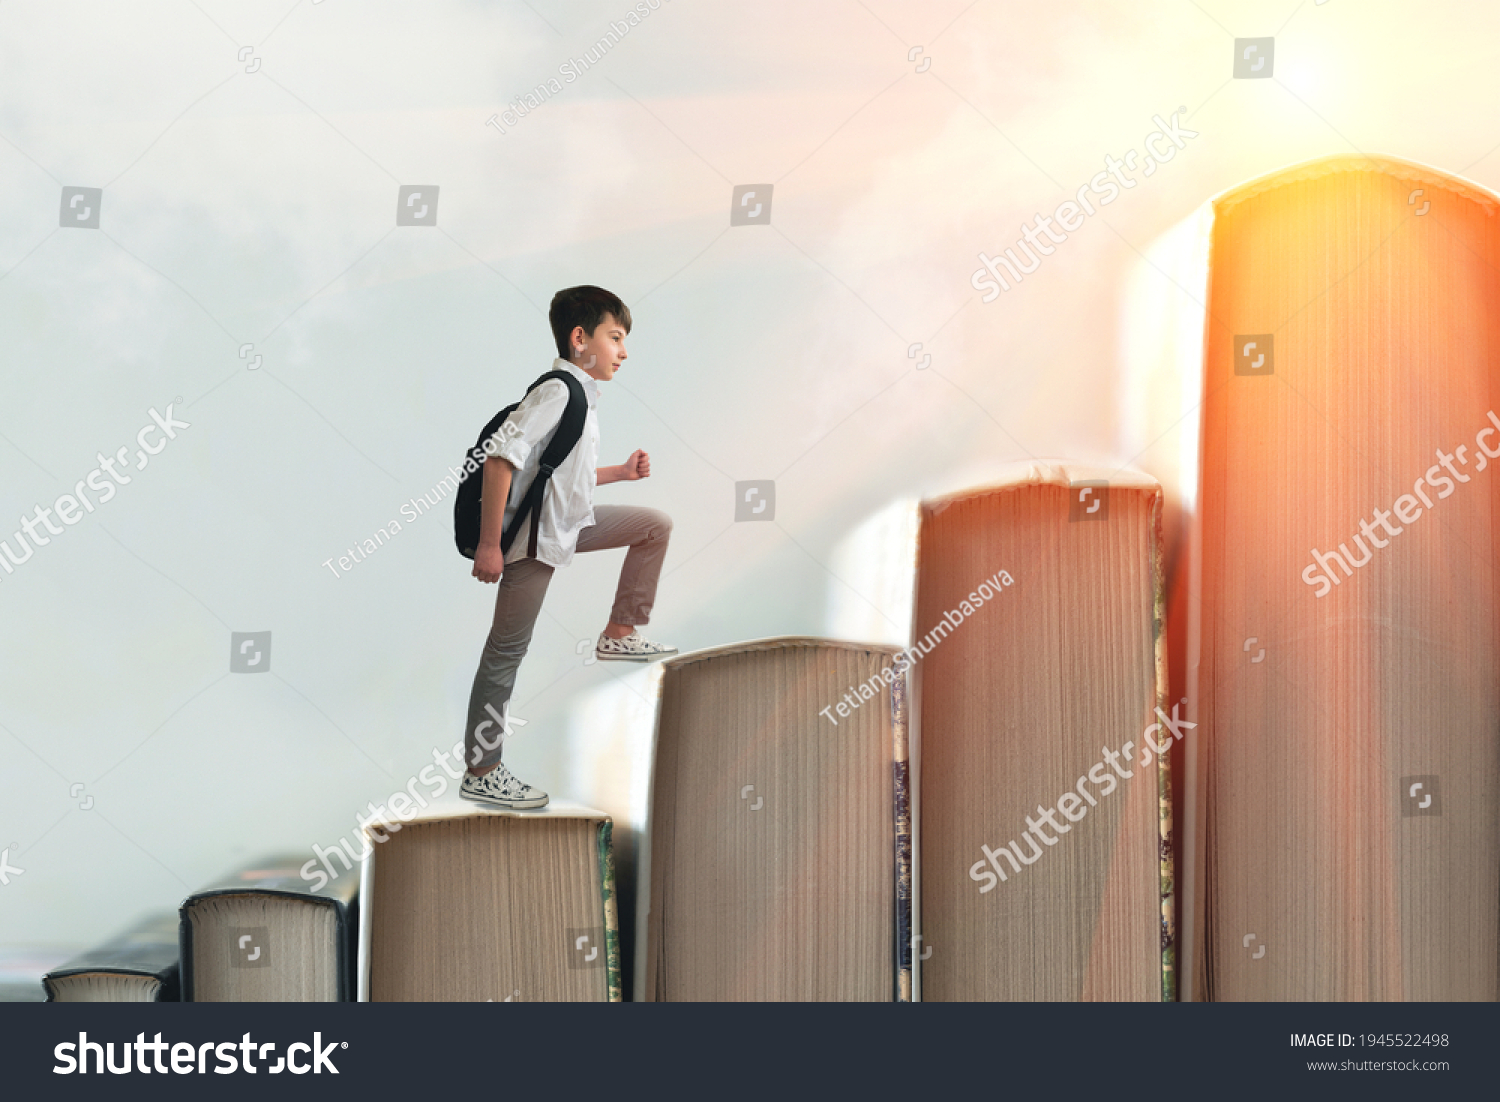 Child climbing stairs made of on sky background. Education or hard study concept. Soft focus #1945522498